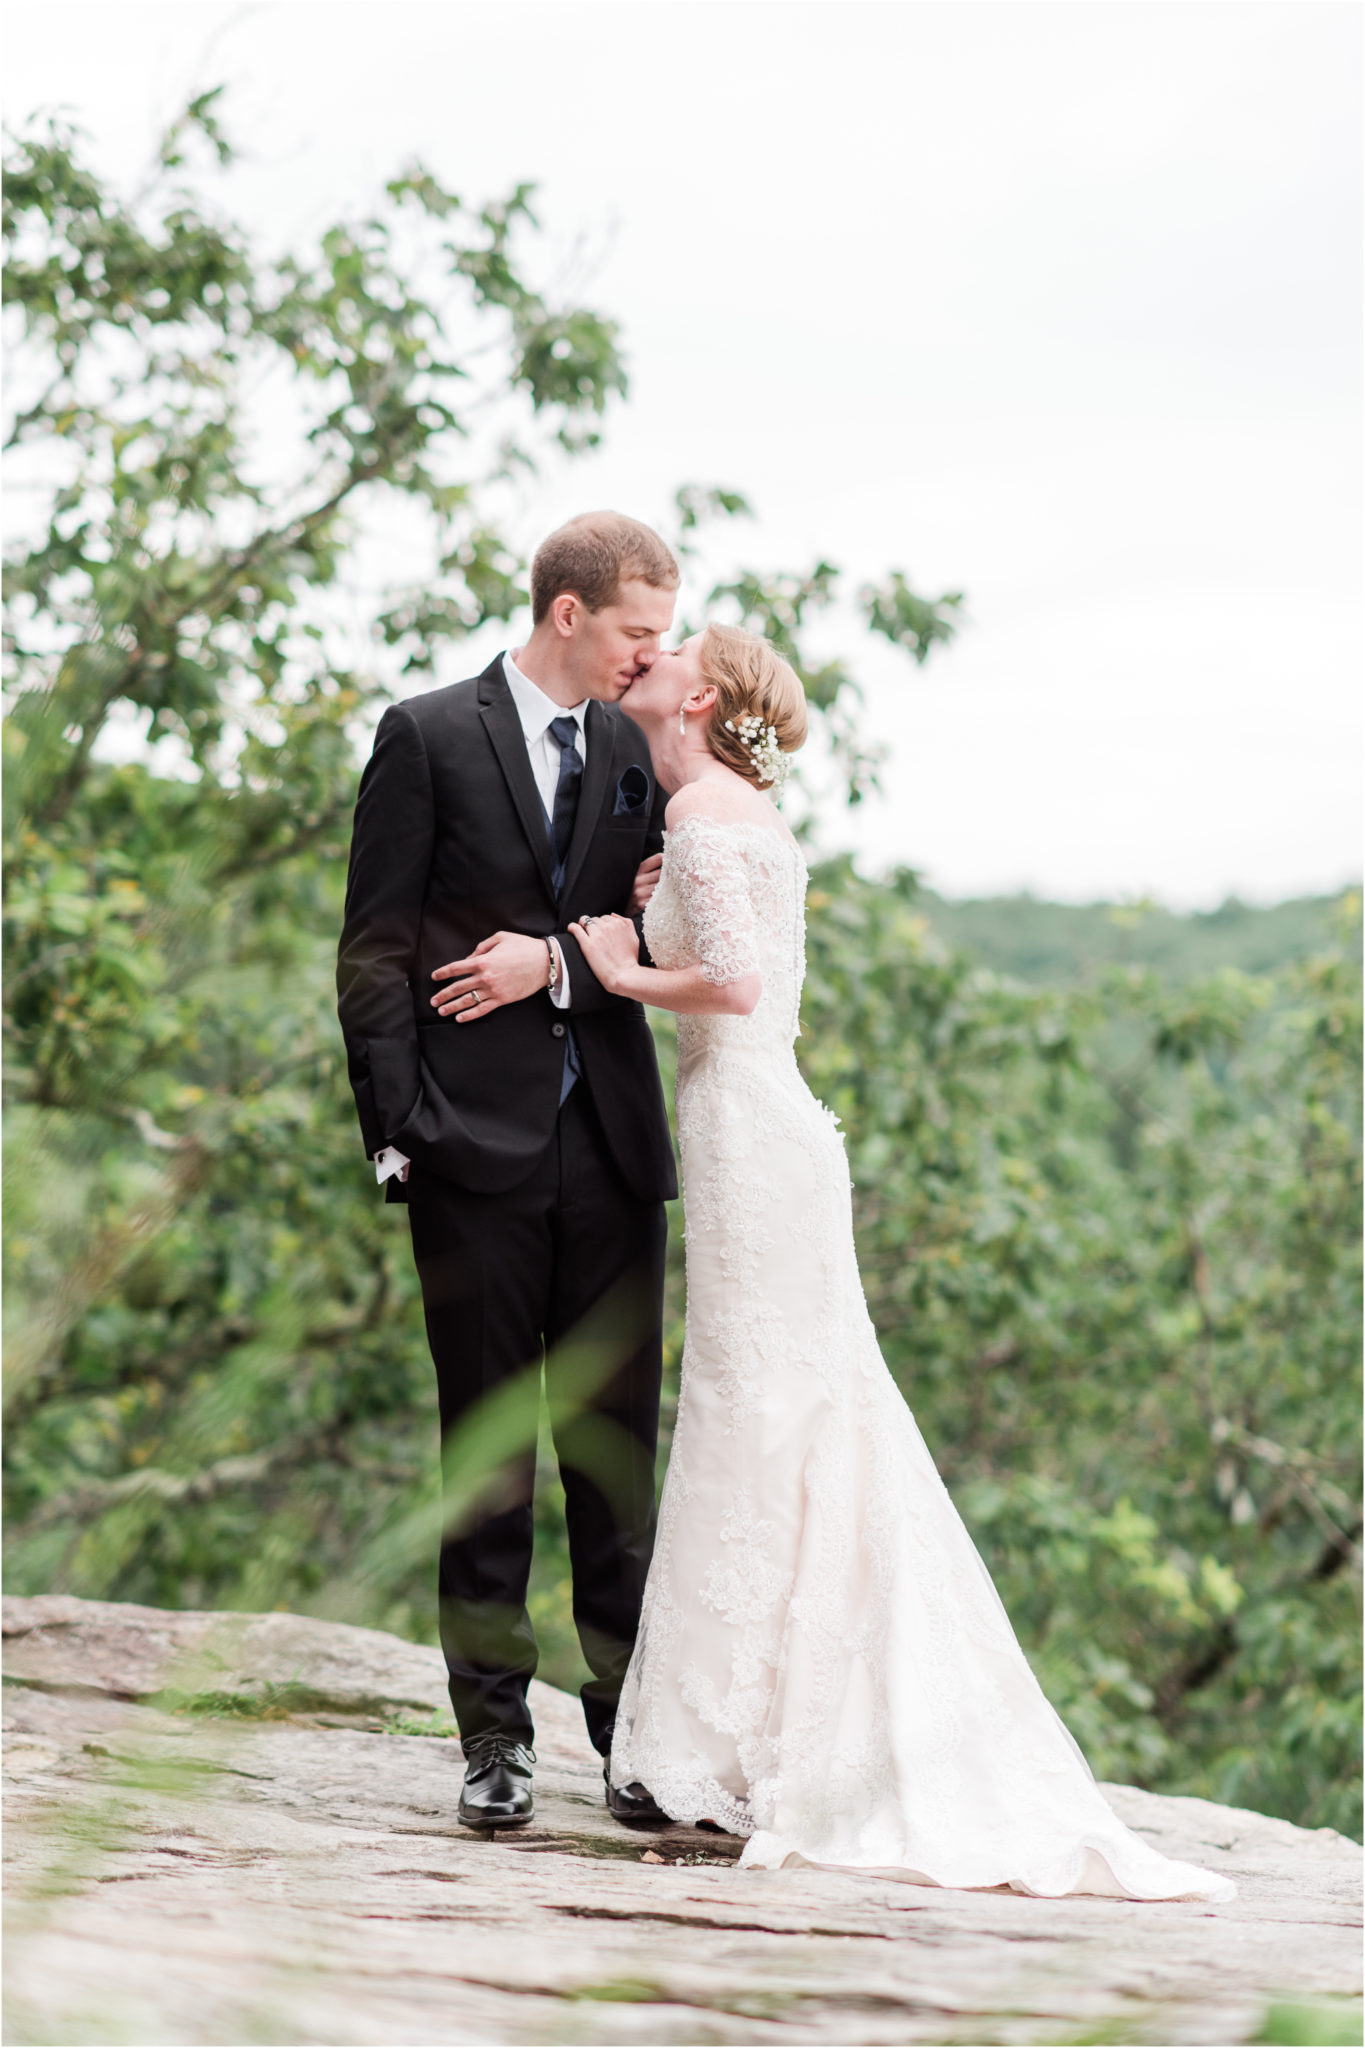 A Pretty Place Chapel Wedding in Cleveland South Carolina